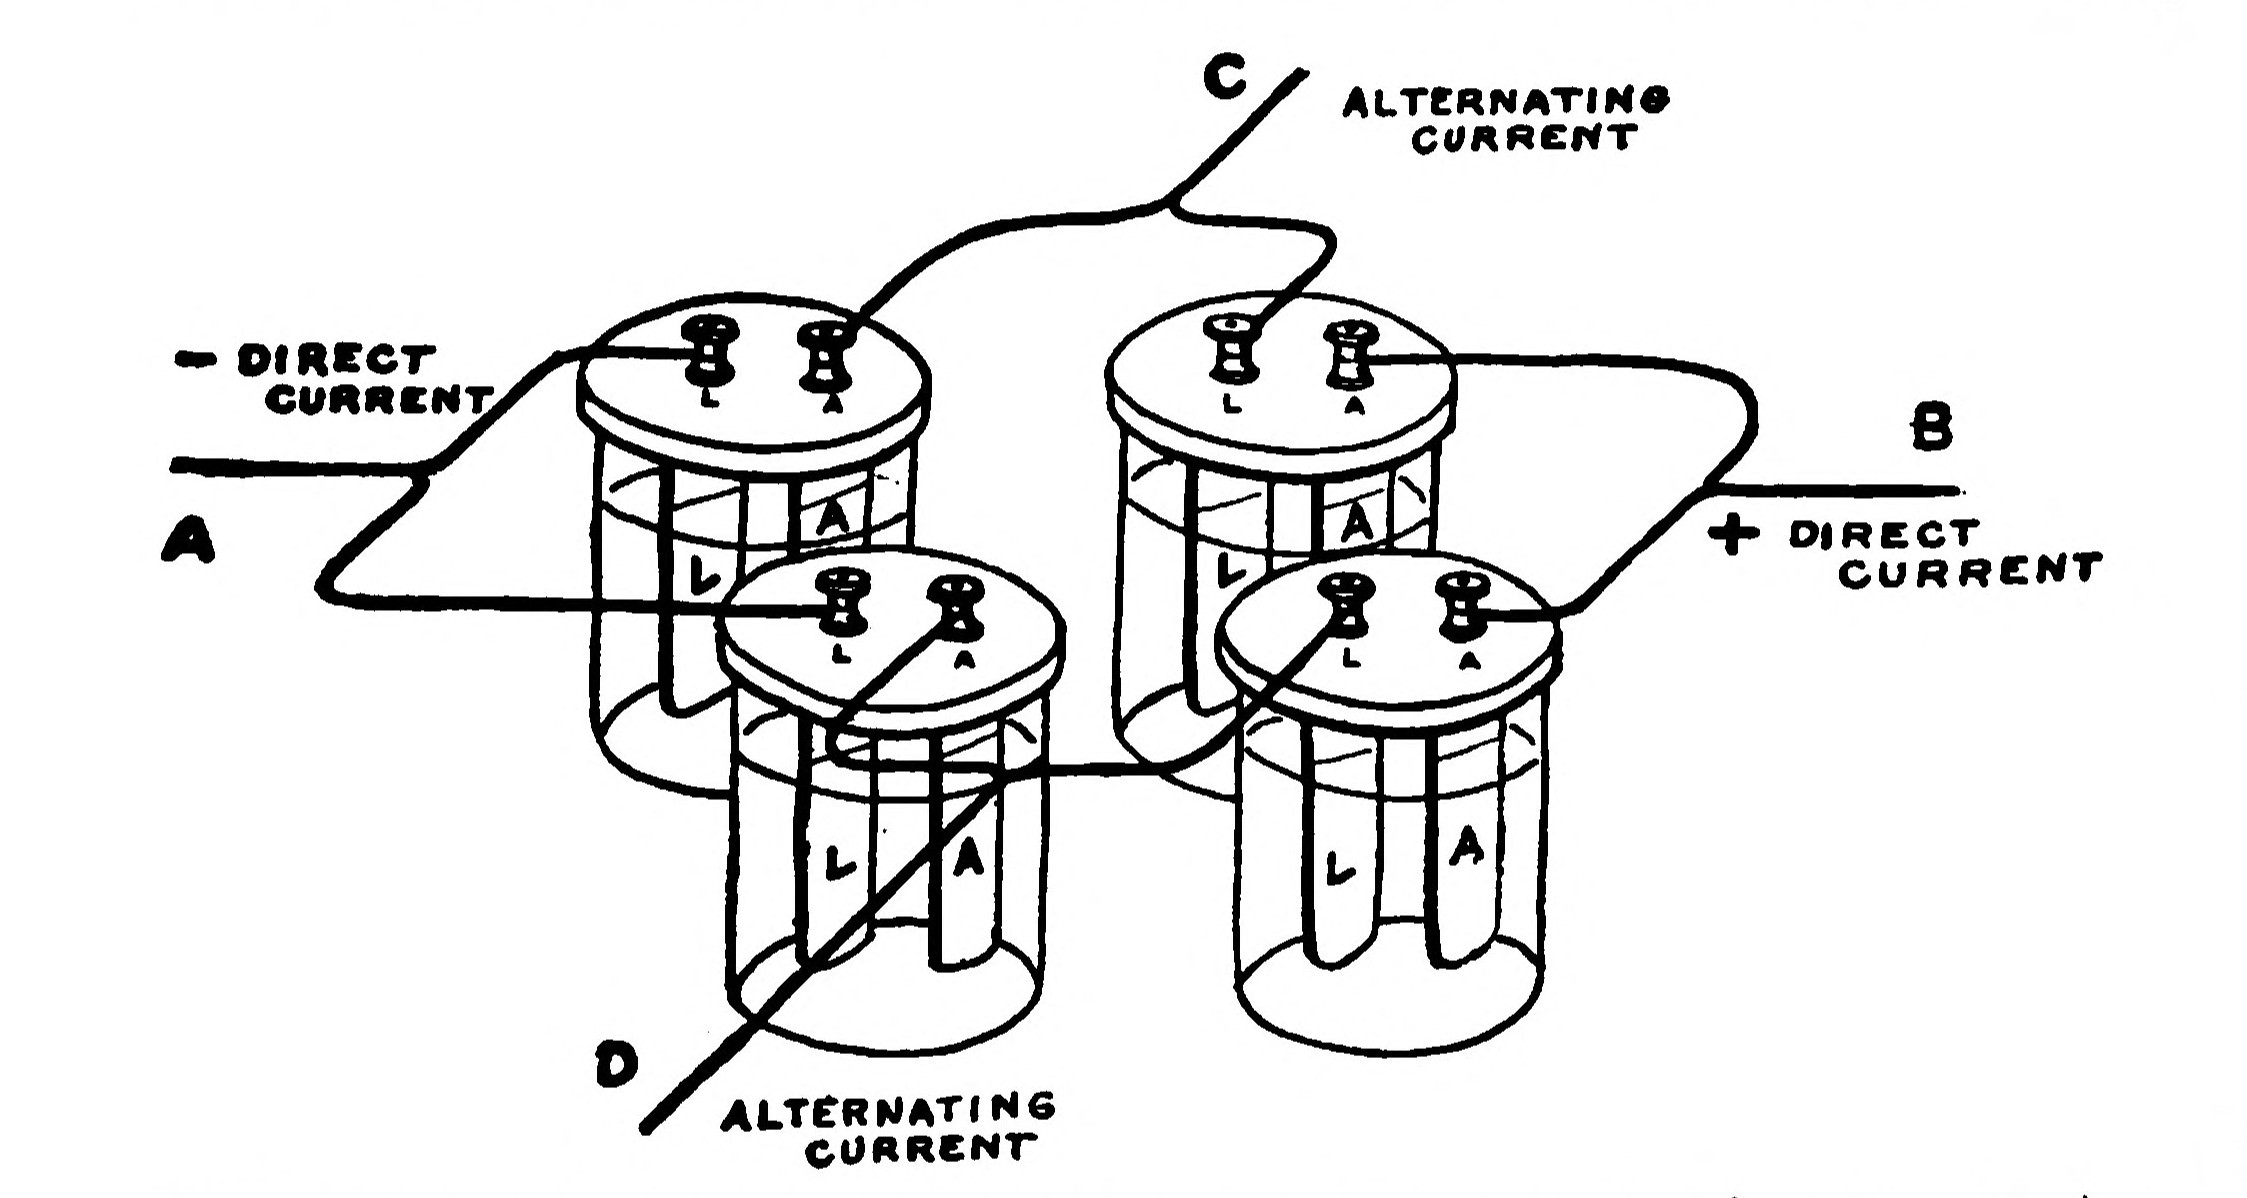 FIG. 56.—Diagram showing how a Four-Cell Rectifier is connected.